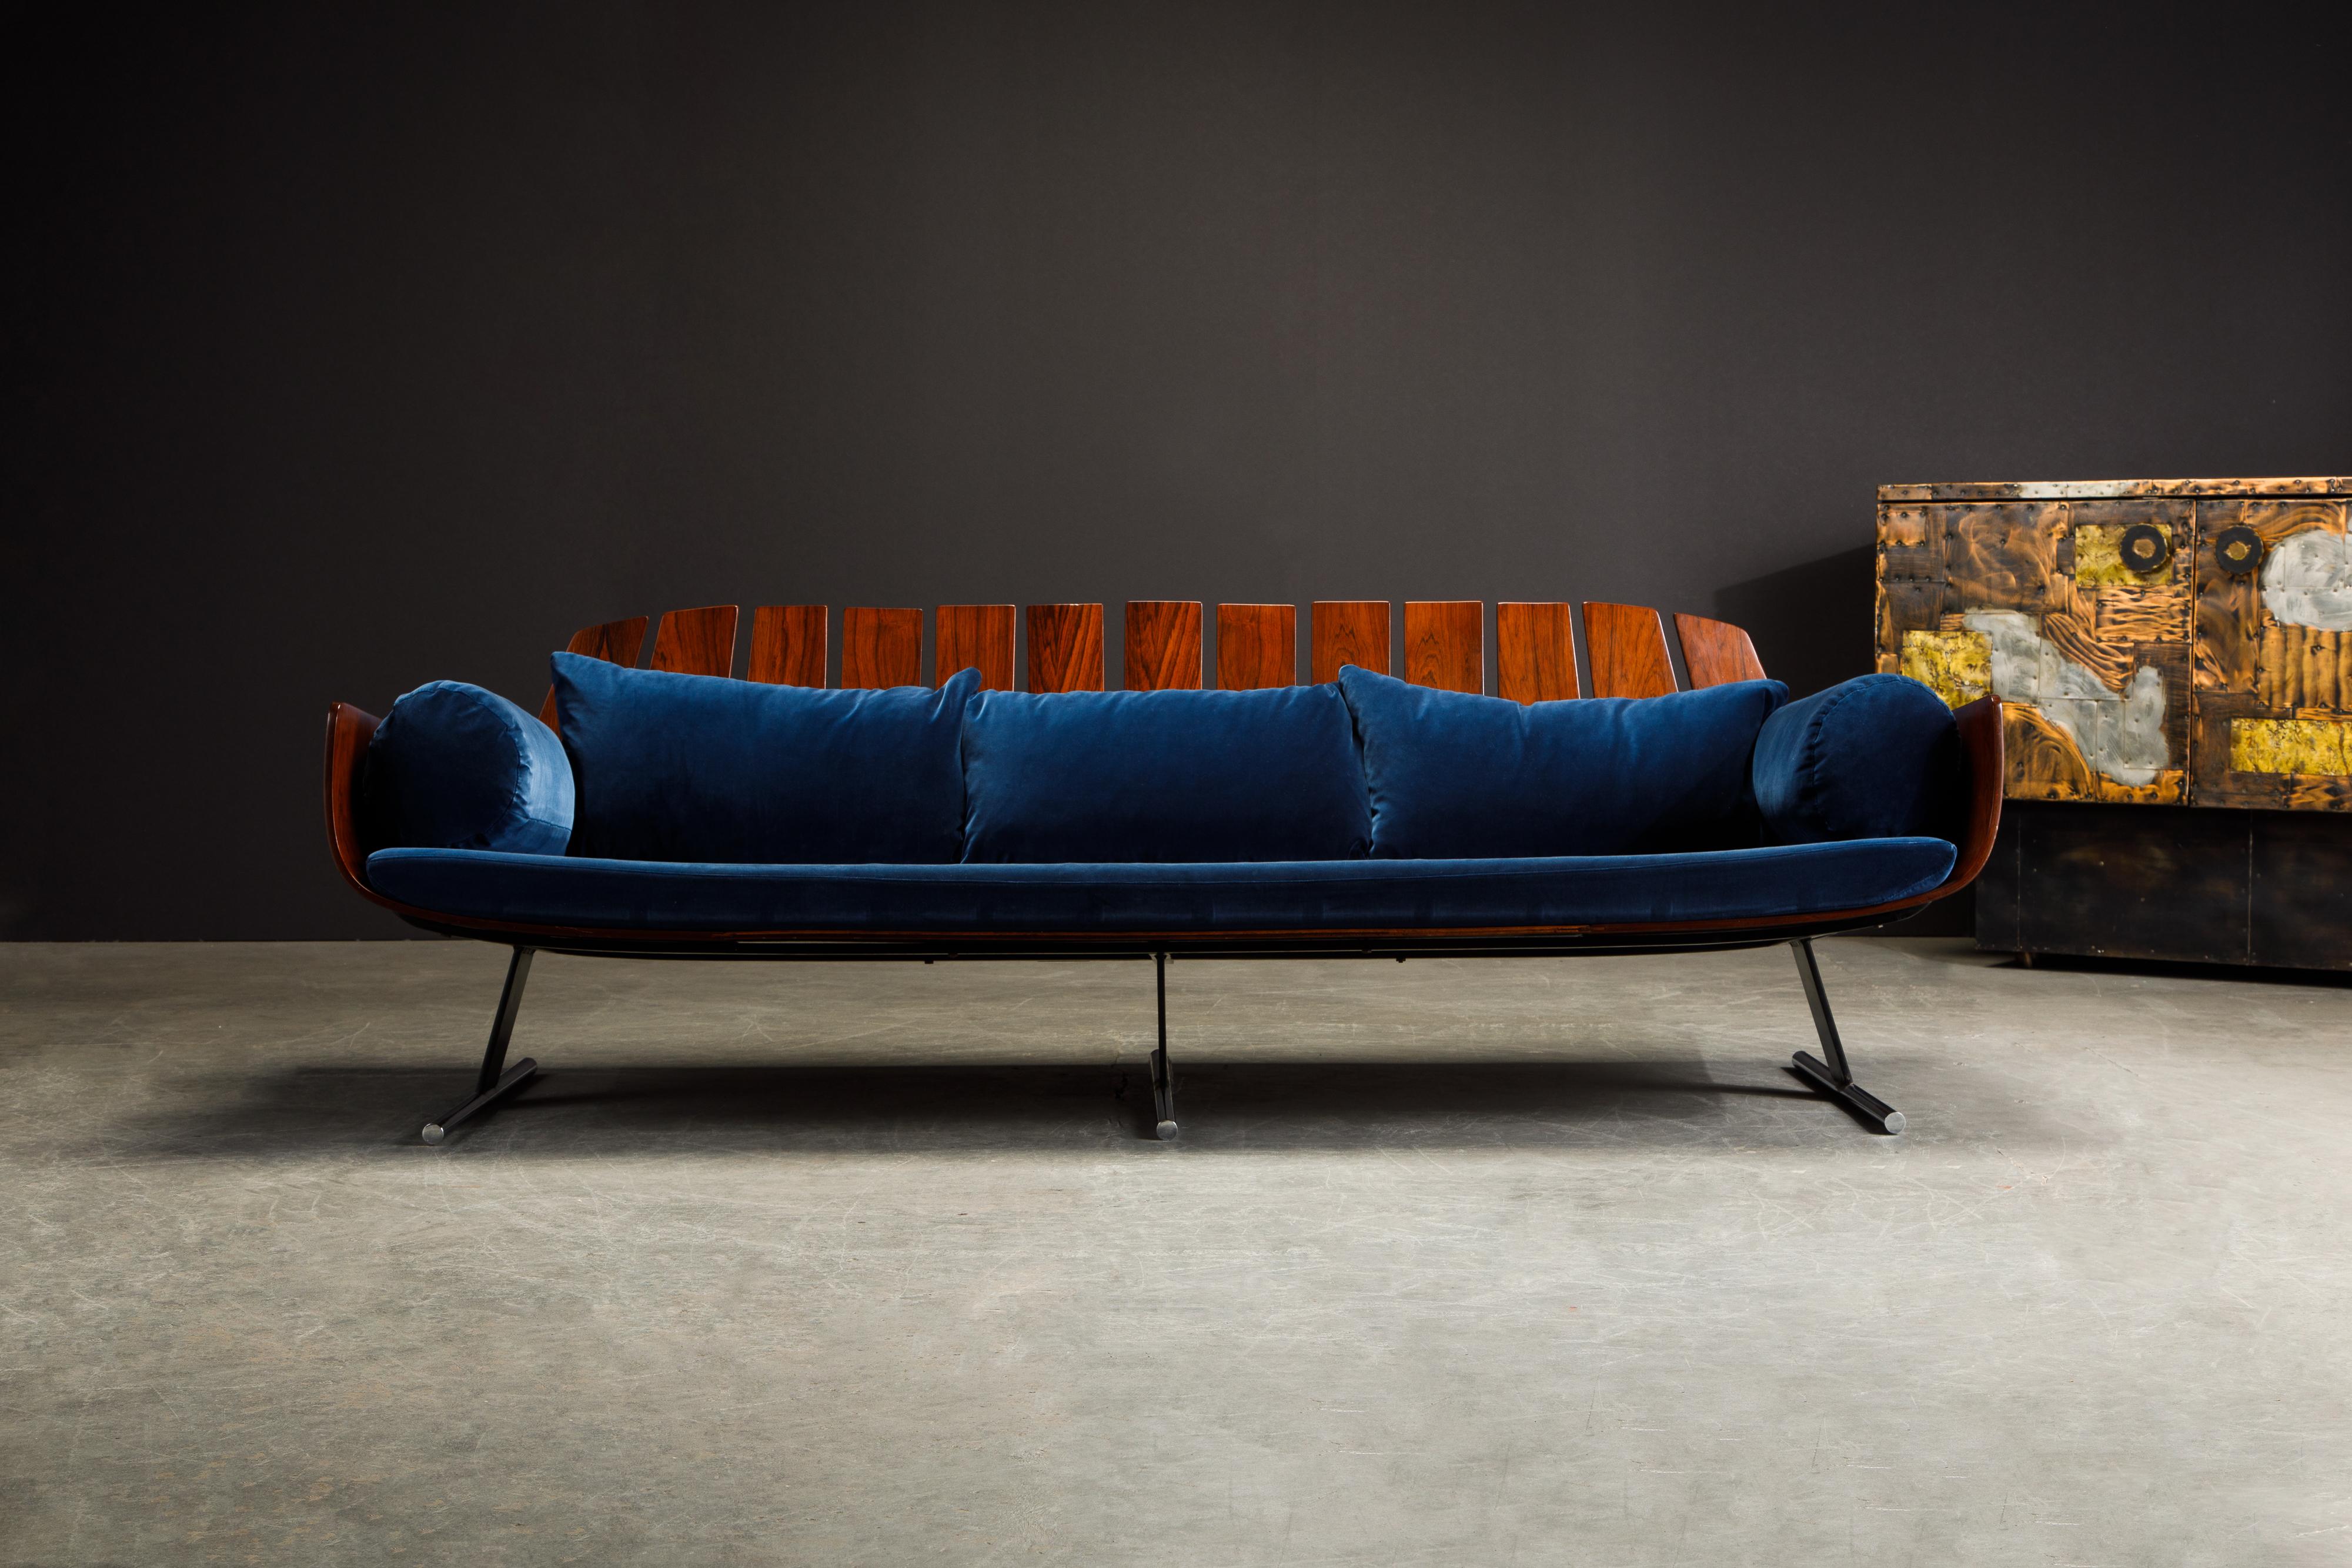 This is an ideal signed collectors example of the extremely rare 'Presidencial' three seat sofa by Jorge Zalszupin for L'Atelier Moveis, Sao Paolo Brazil, circa 1960. Featuring a sculptural Jacaranda (an exotic variant of Brazilian Rosewood) frame